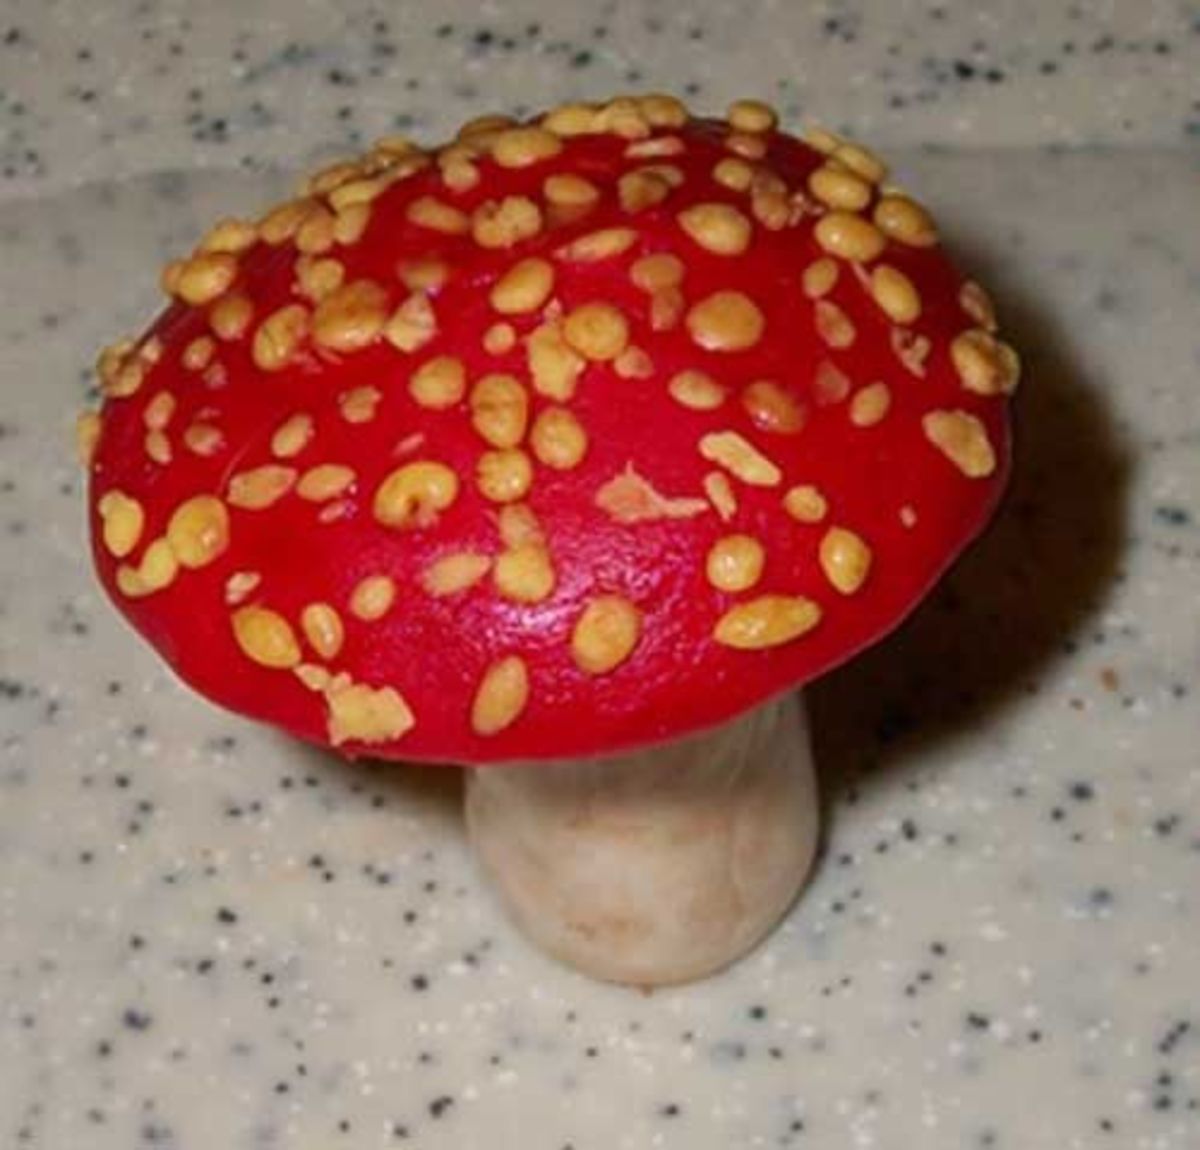 Press the mushroom cap onto the stem and set it aside to dry.